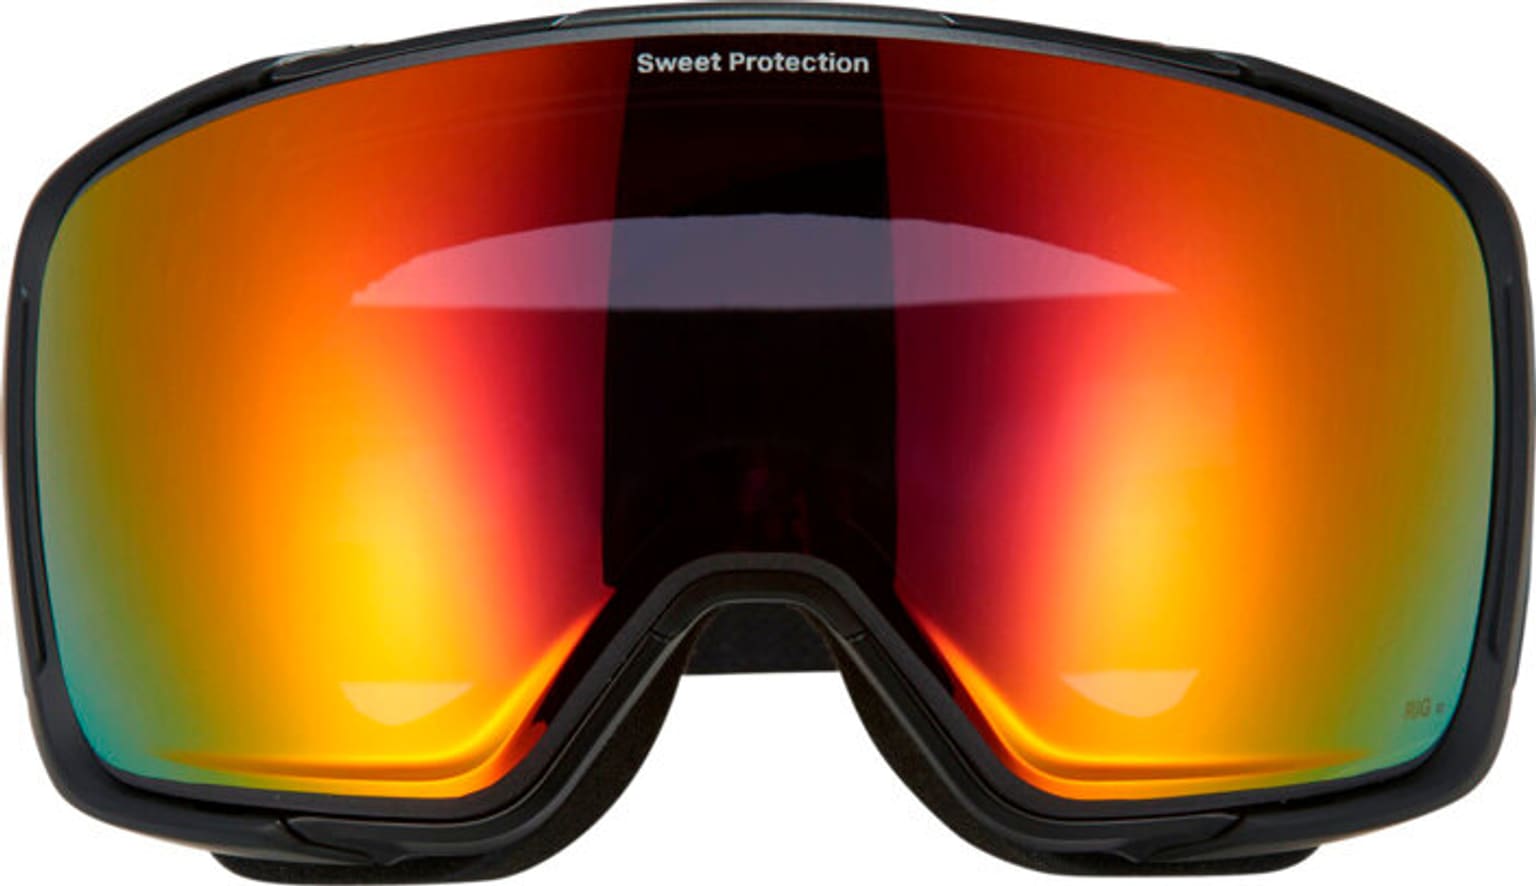 Sweet Protection Sweet Protection Interstellar RIG Reflect with Extra Lens Occhiali da sci nero 2